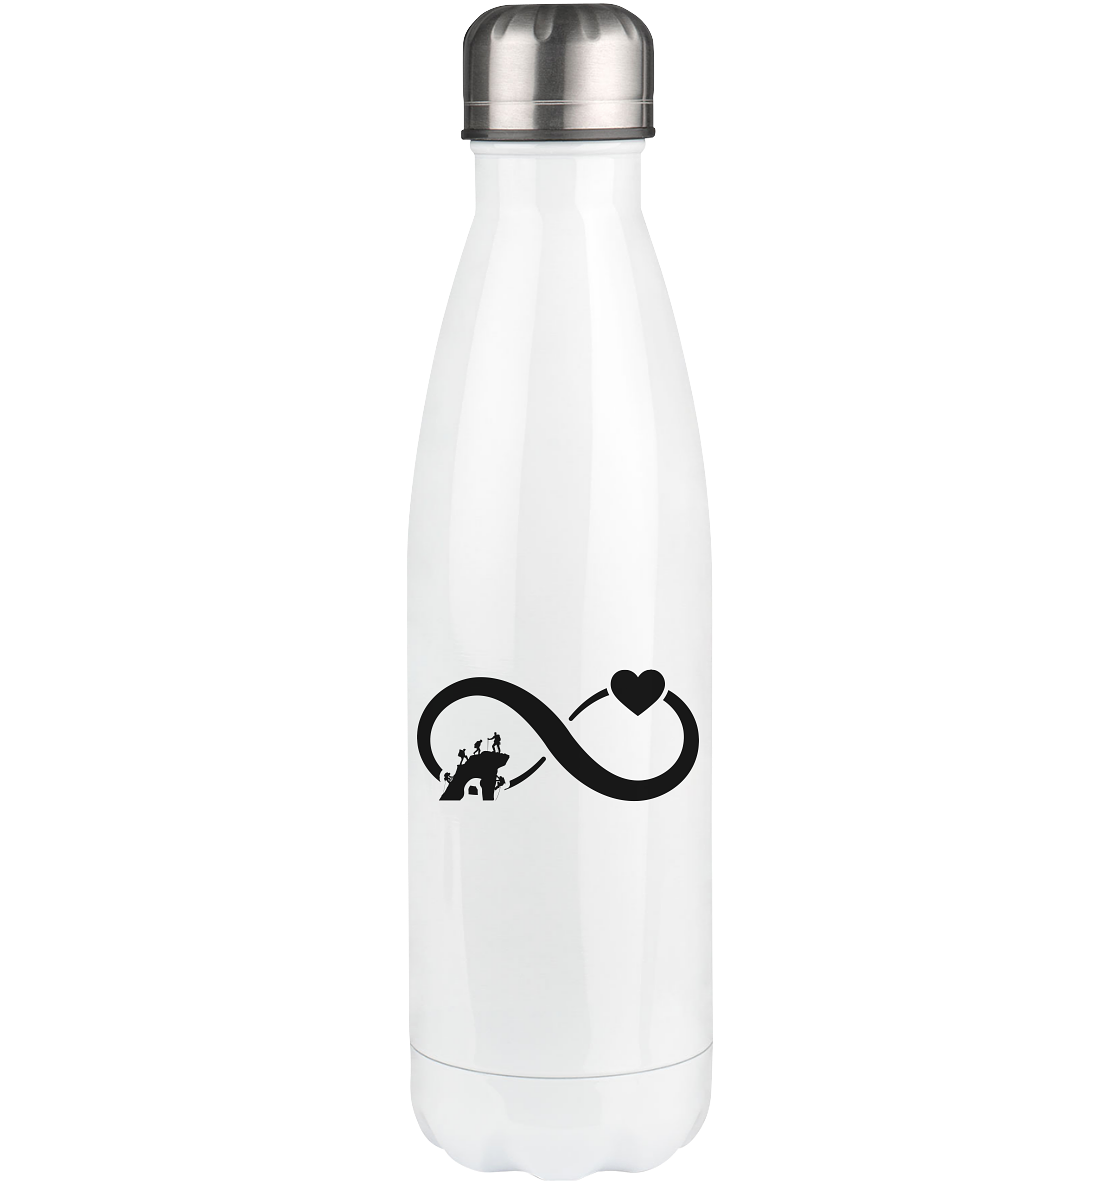 Infinity Heart and Climbing - Edelstahl Thermosflasche klettern 500ml